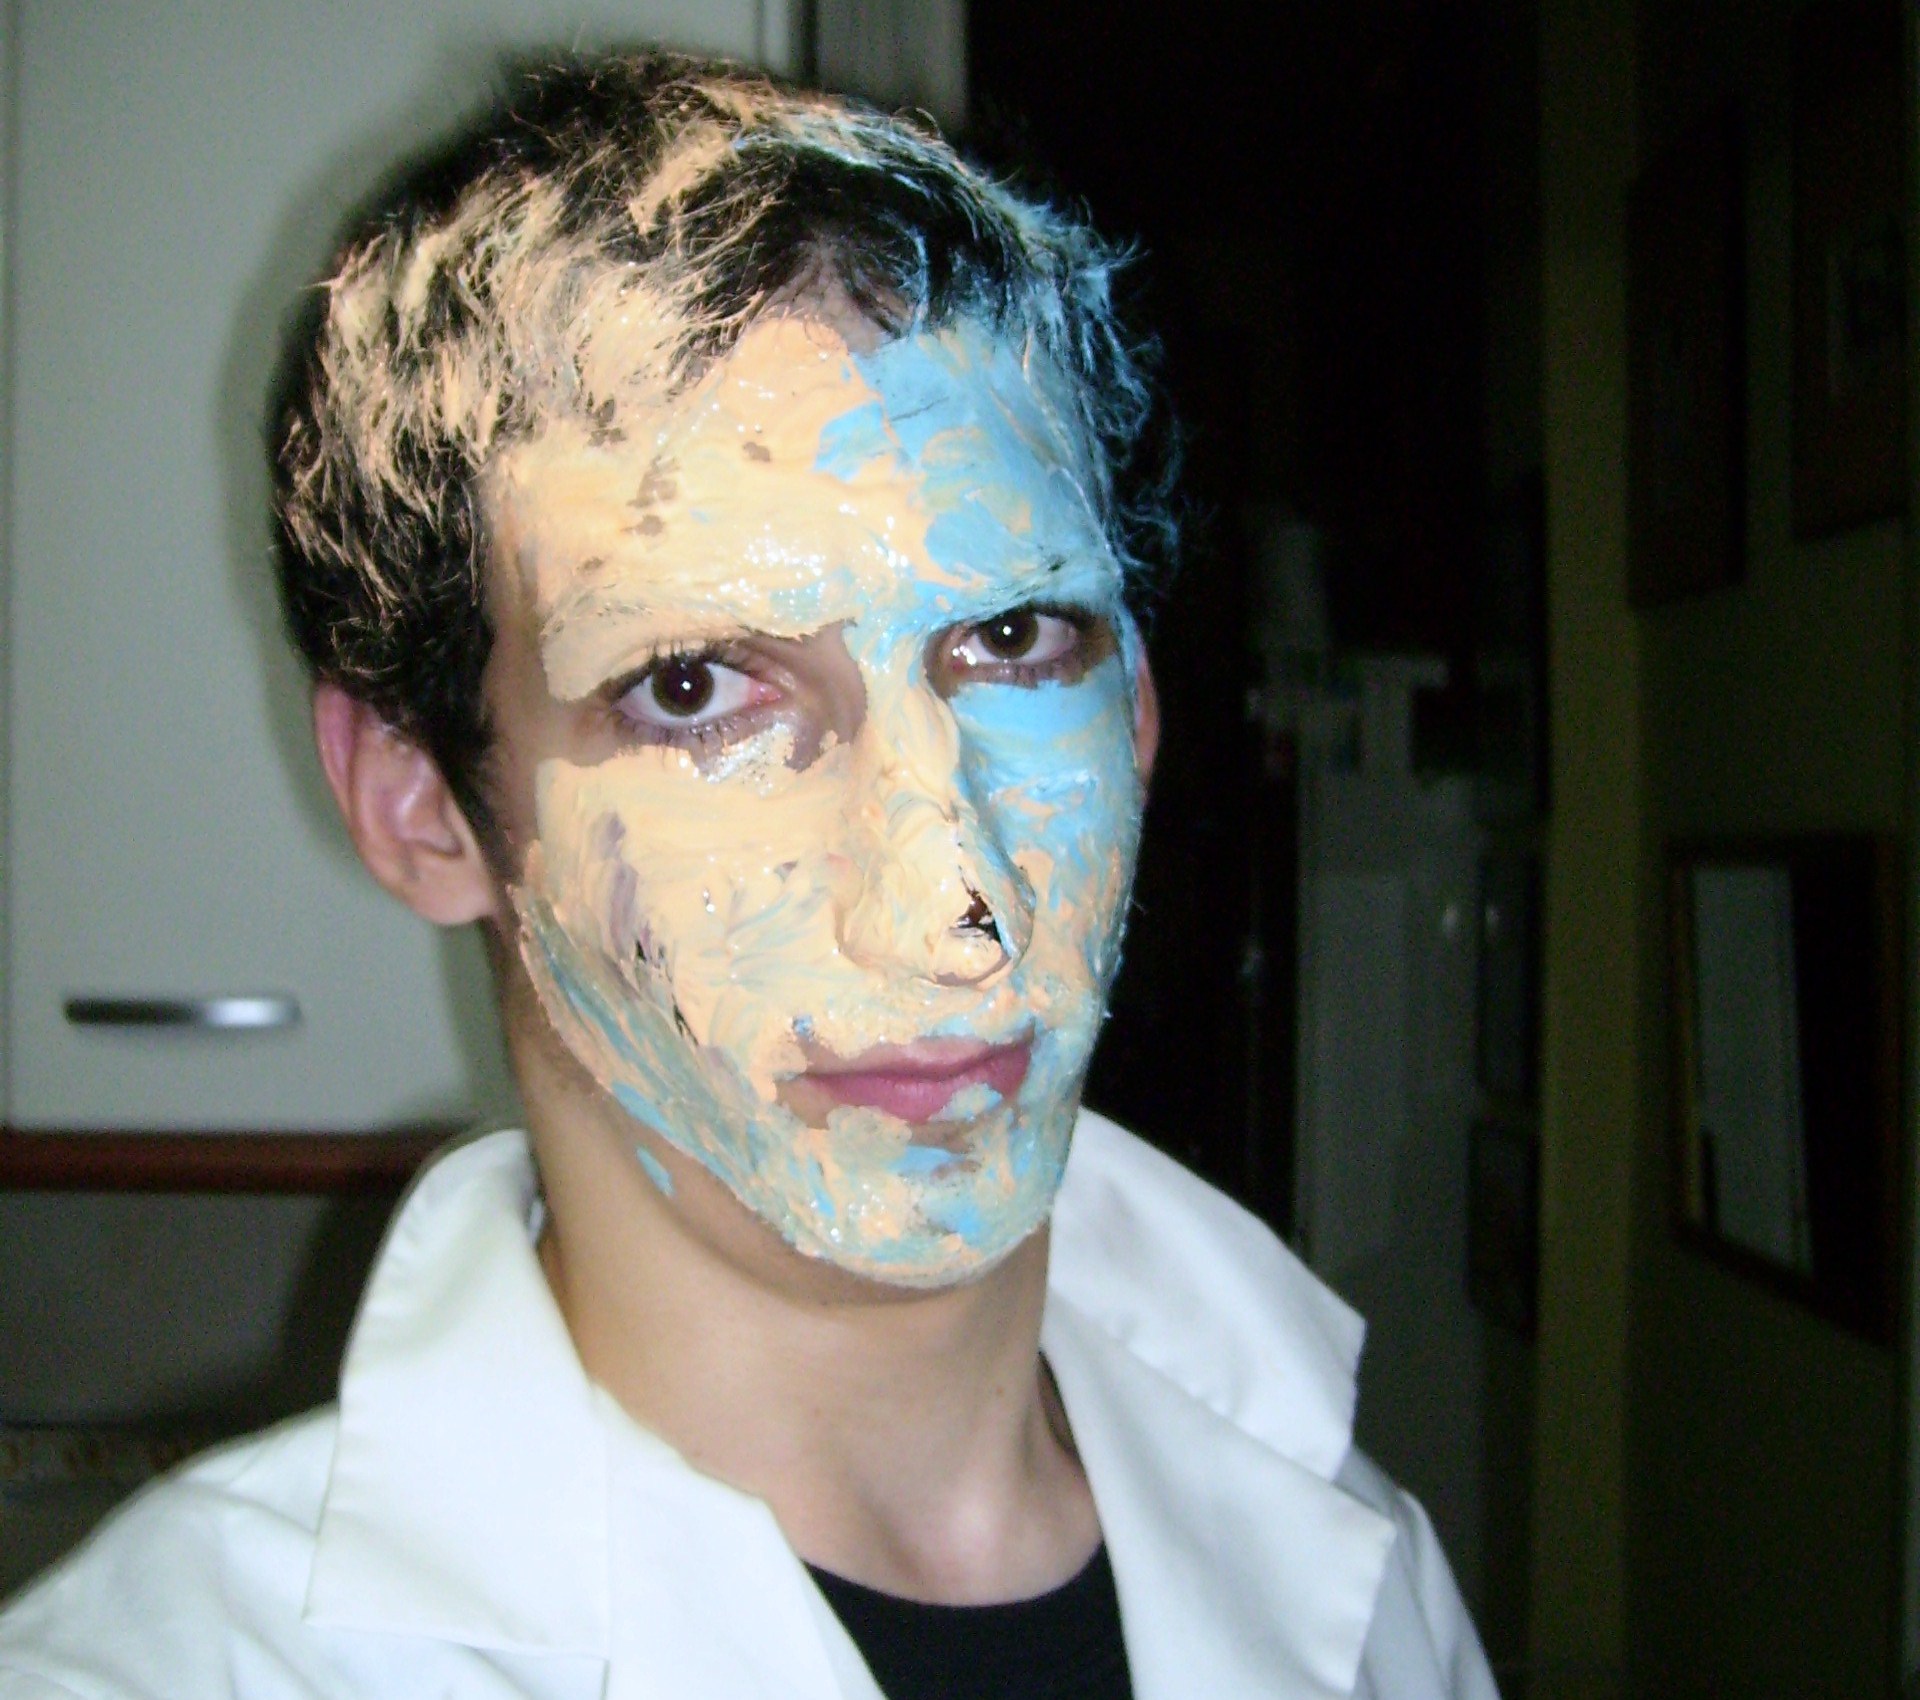 Josue Tonelli-Cueto at 2010 with paint on his face